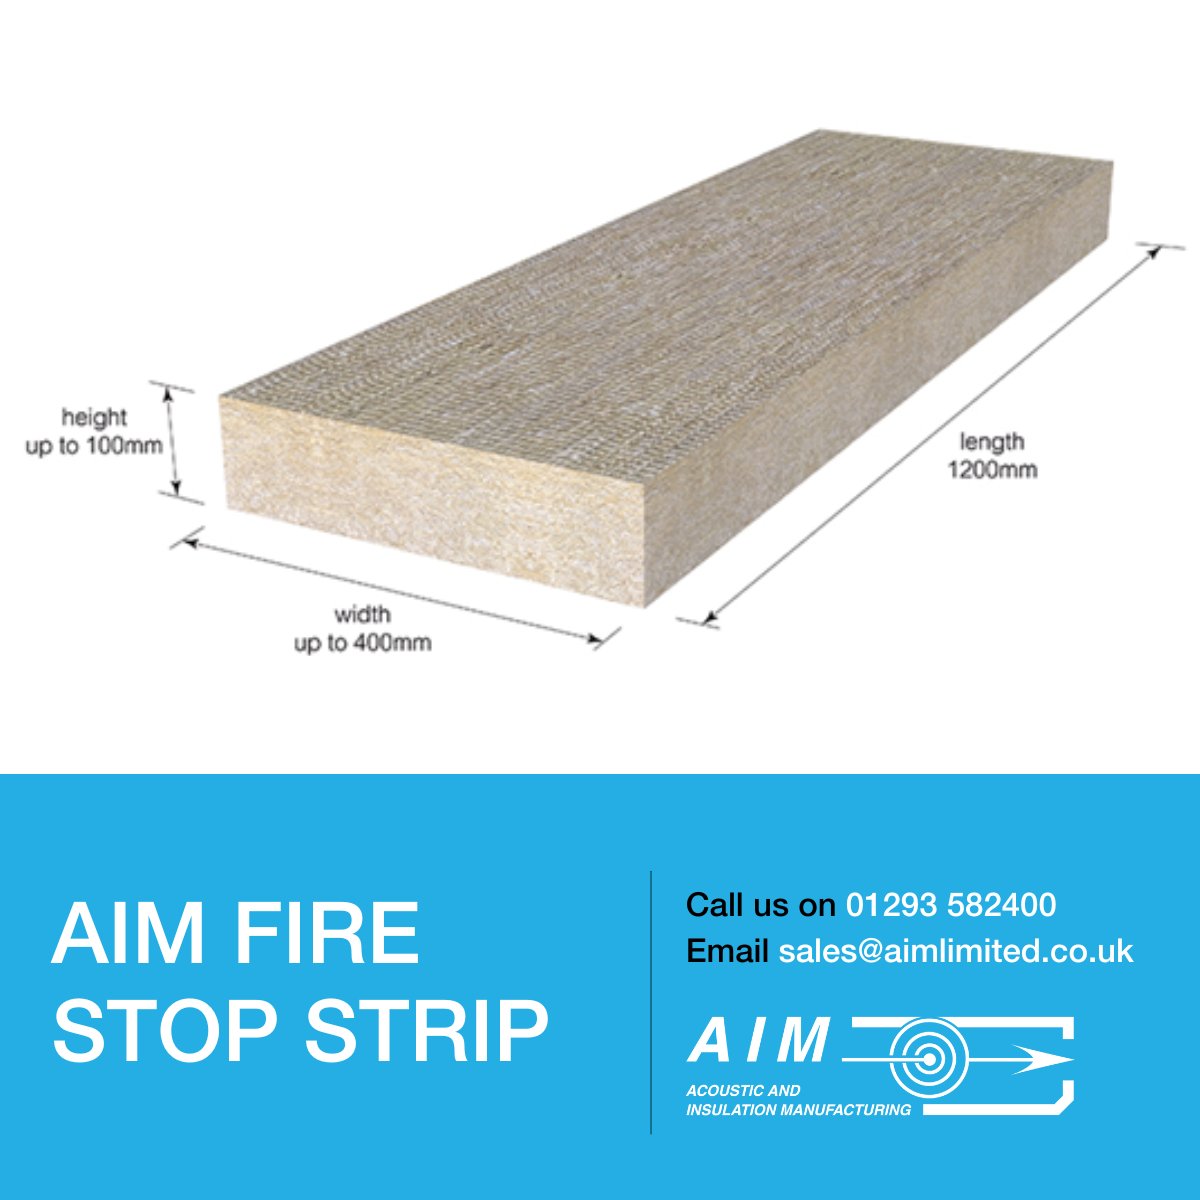 AIM Fire Stop Strip

·       High Density Rock stonewool strips typically supplied 1200mm long
·       Made to order to any size up to 400mm wide
·       Suitable for voids of up to 100mm.
·       Suitable for horizontal and vertical applications

#buildingmaterials